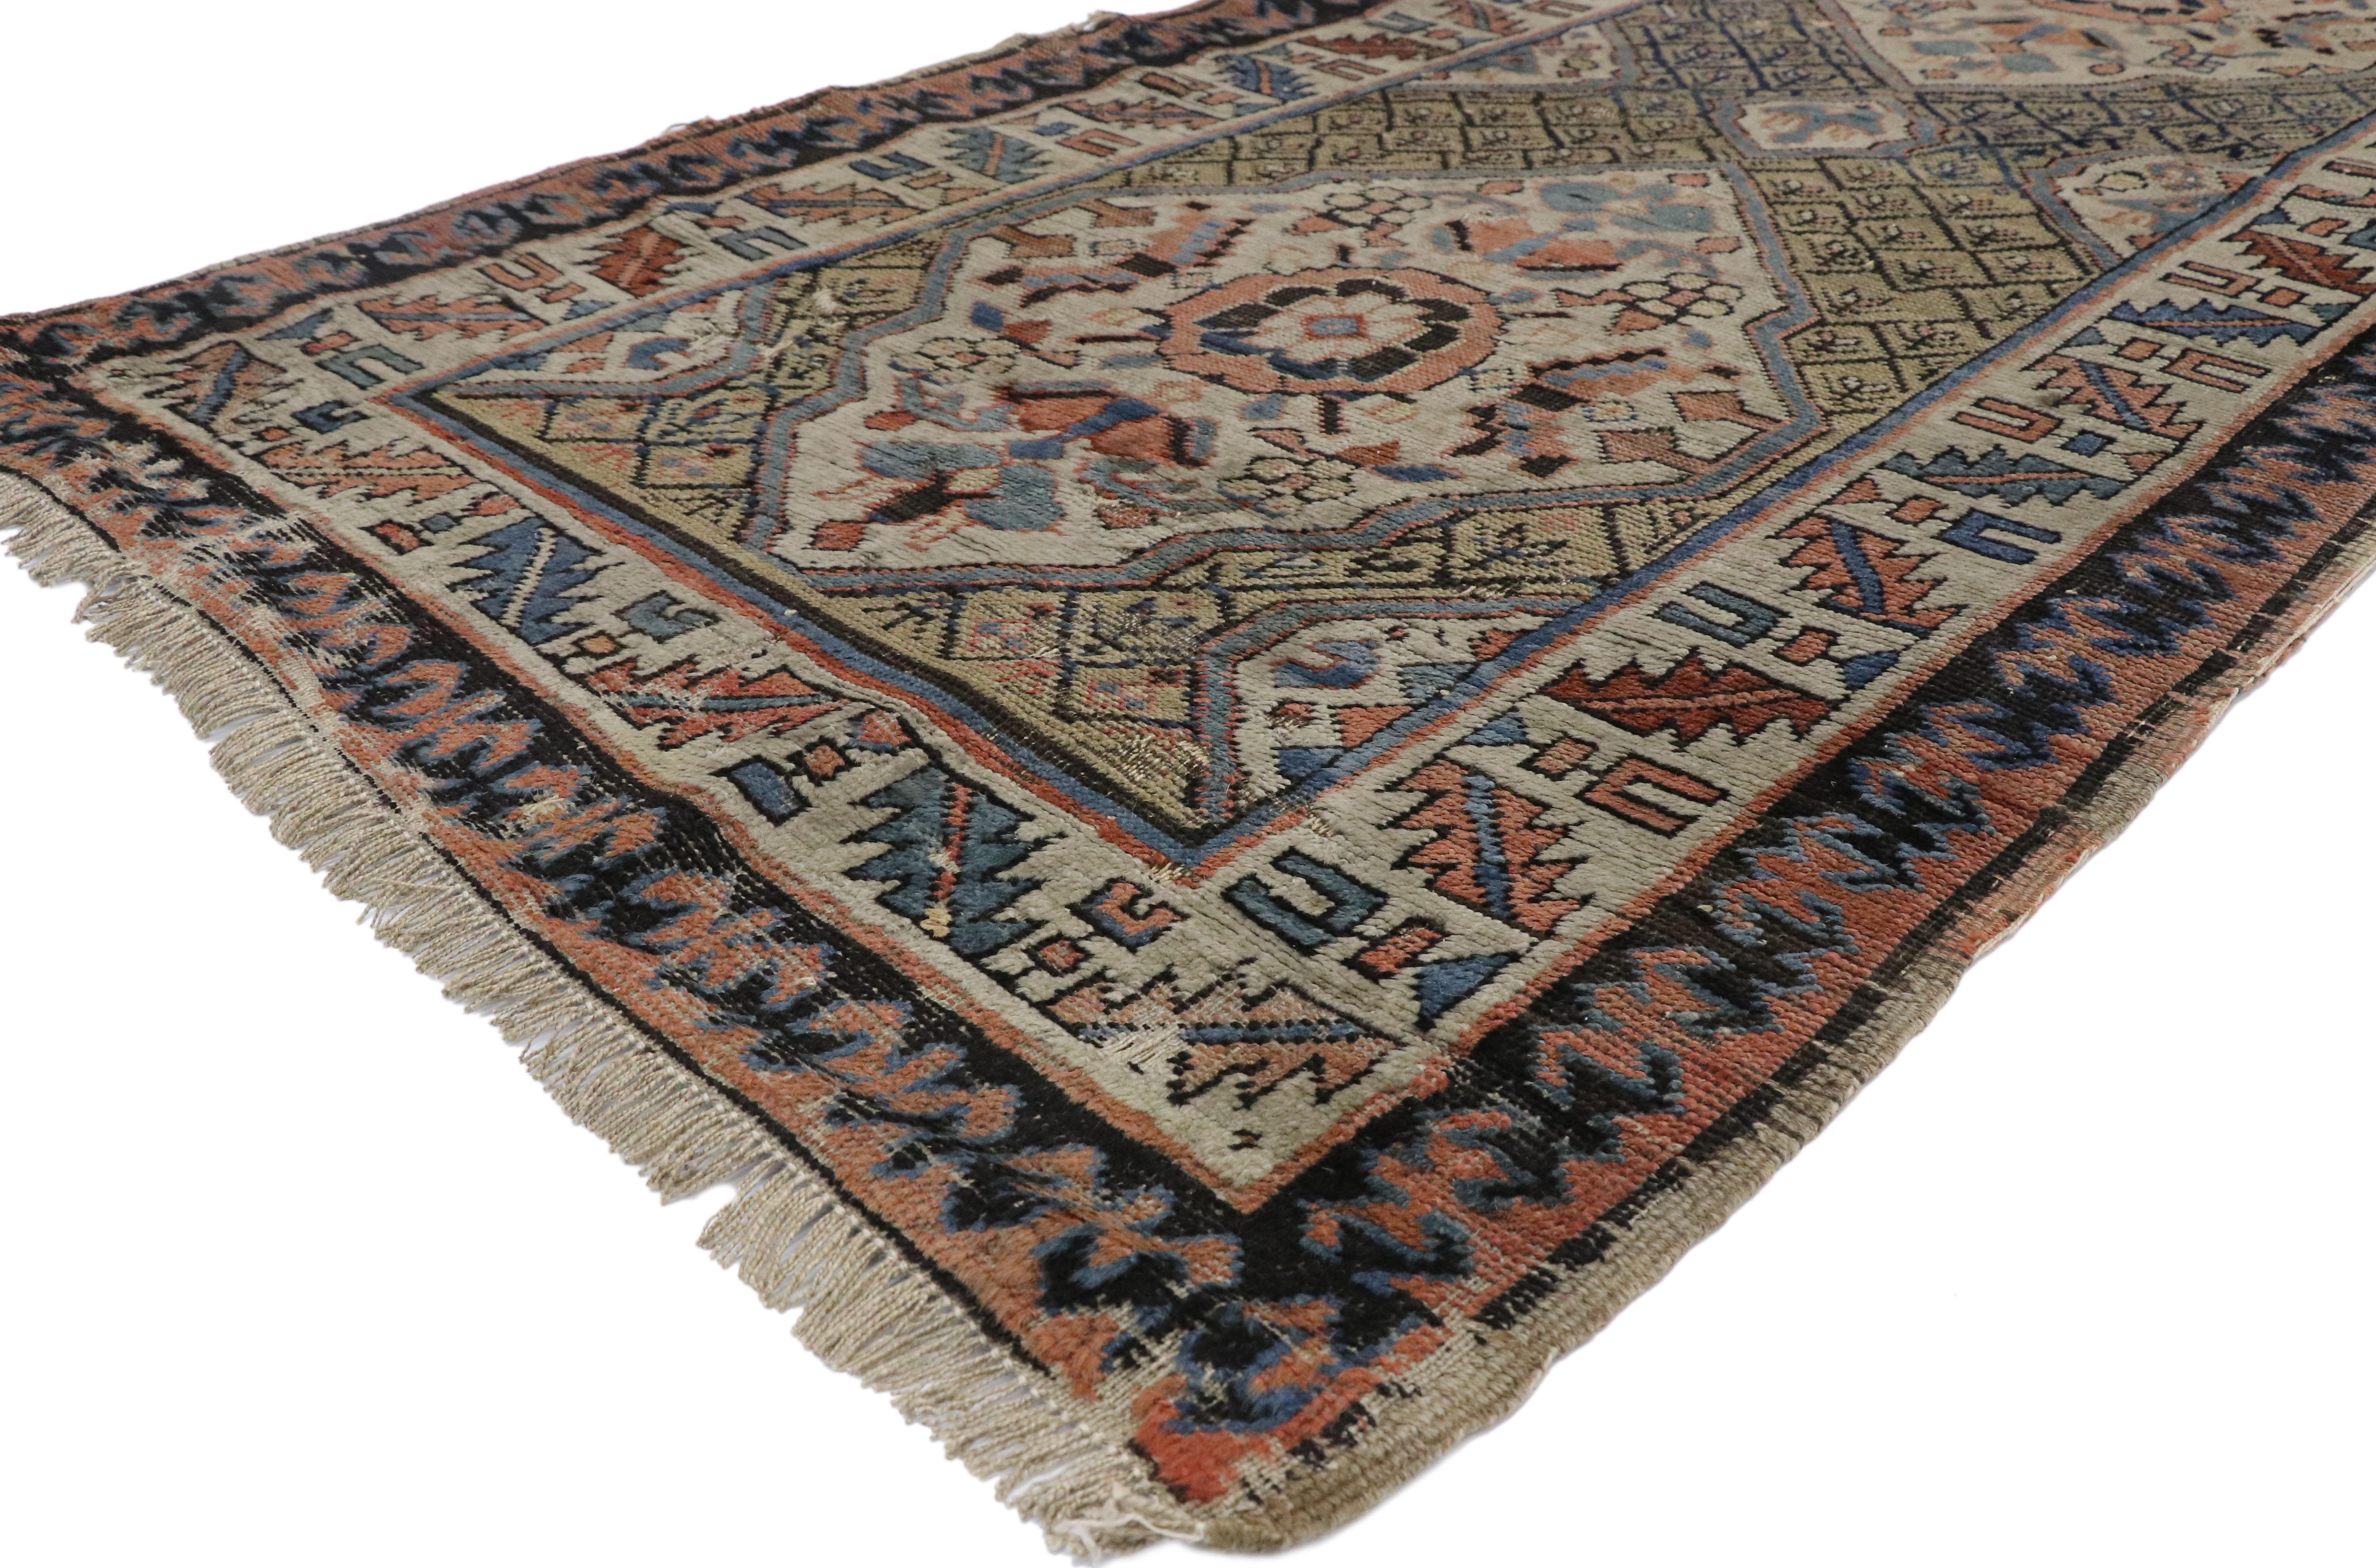 77058 Distressed Antique Russian Tribal Kazak Rug, Caucasian Hallway Runner 03'02 x 11'05. This hand-knotted wool antique Russian Kazak runner features three large scale lozenge motifs filled with stylized florals and animal motifs formed from